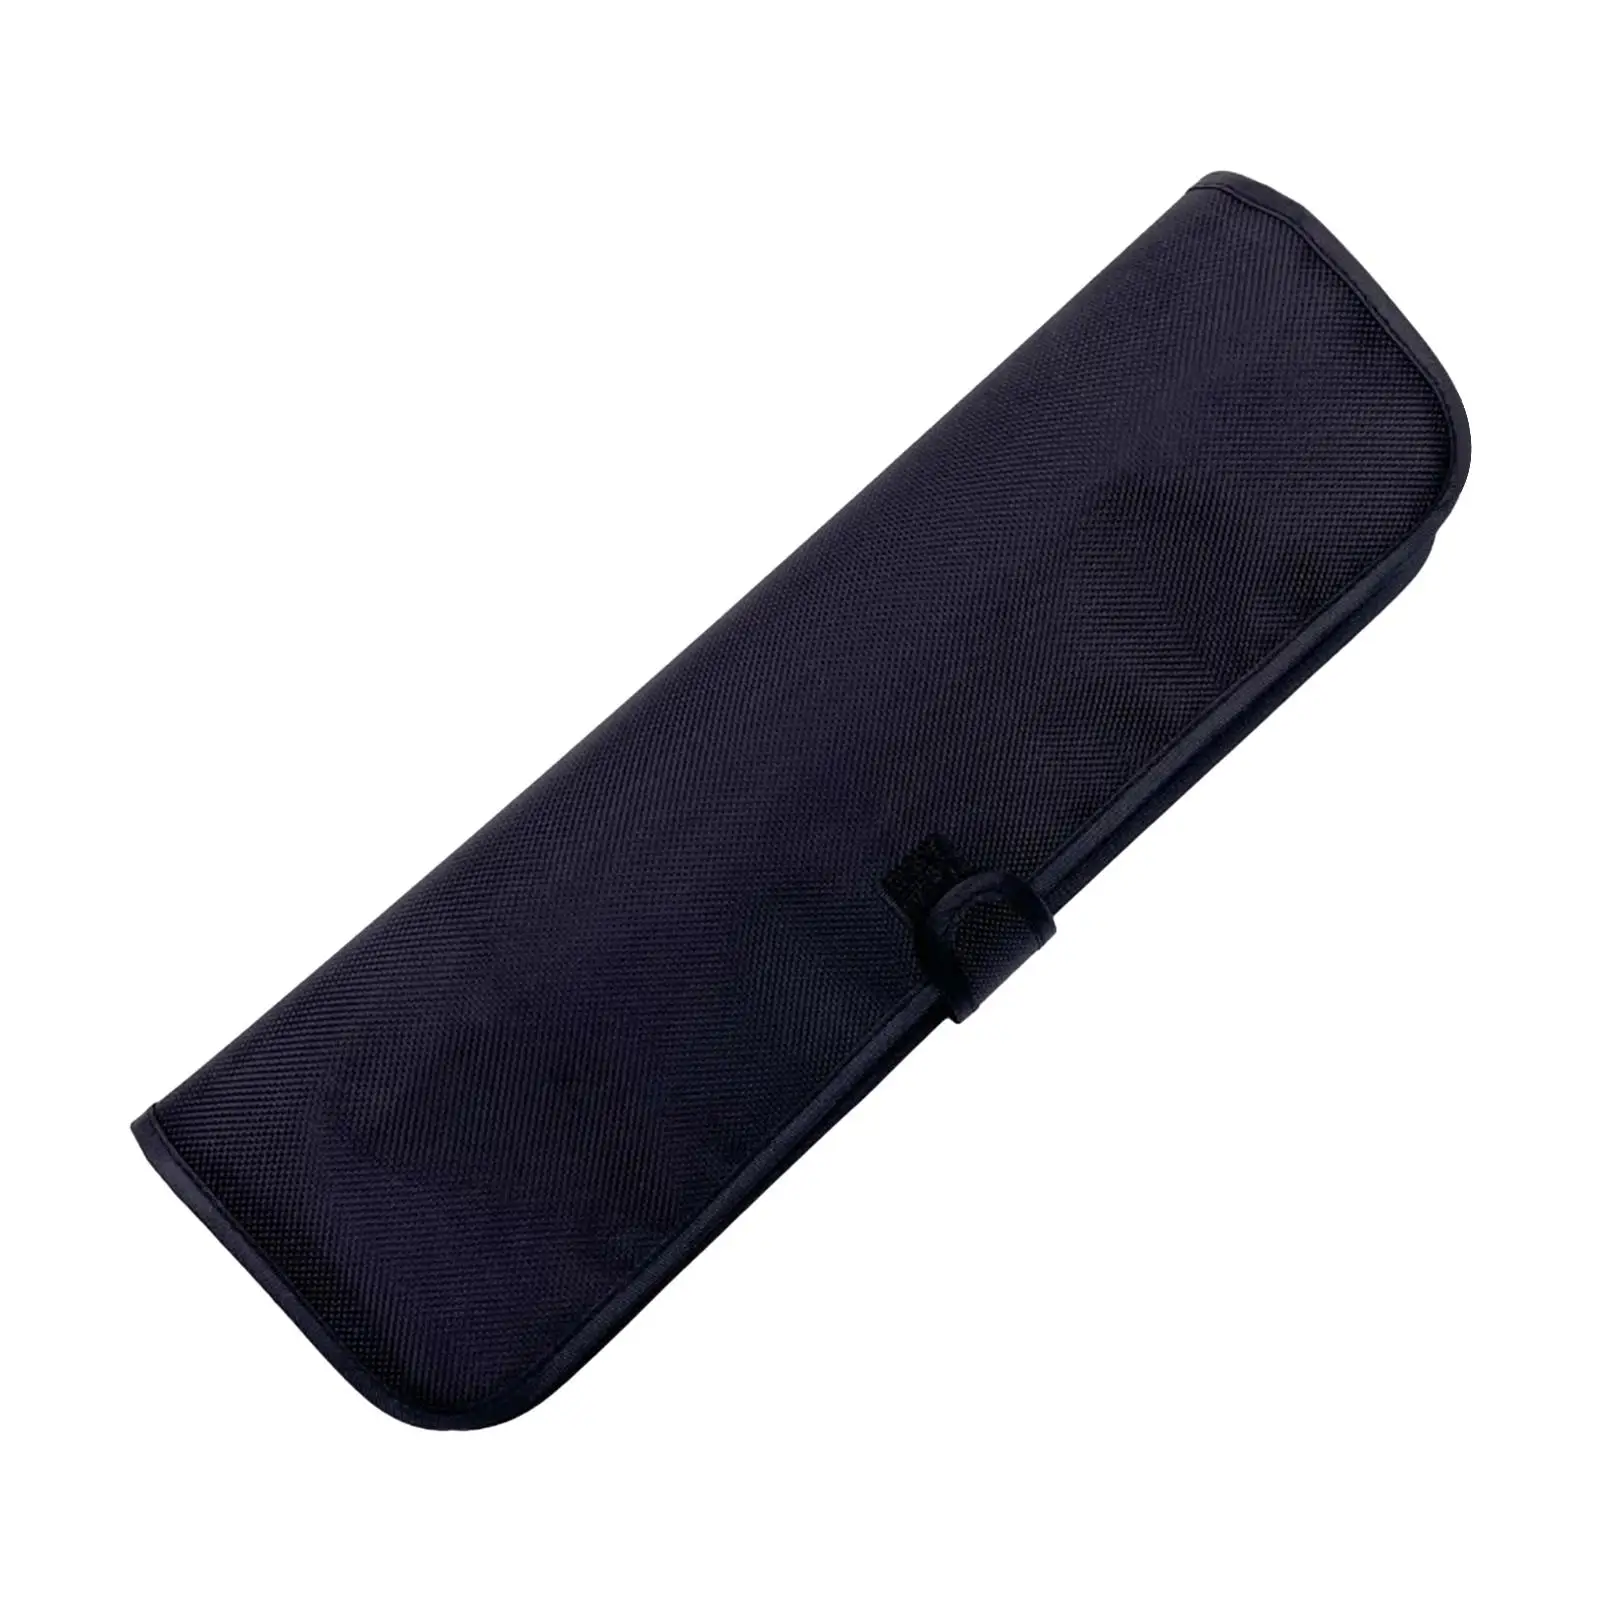 Hair Straightener Travel Case Oxford Cloth Multipurpose Accessories Flat Iron Travel Case for Scissors Combs Trimmer Flat Iron